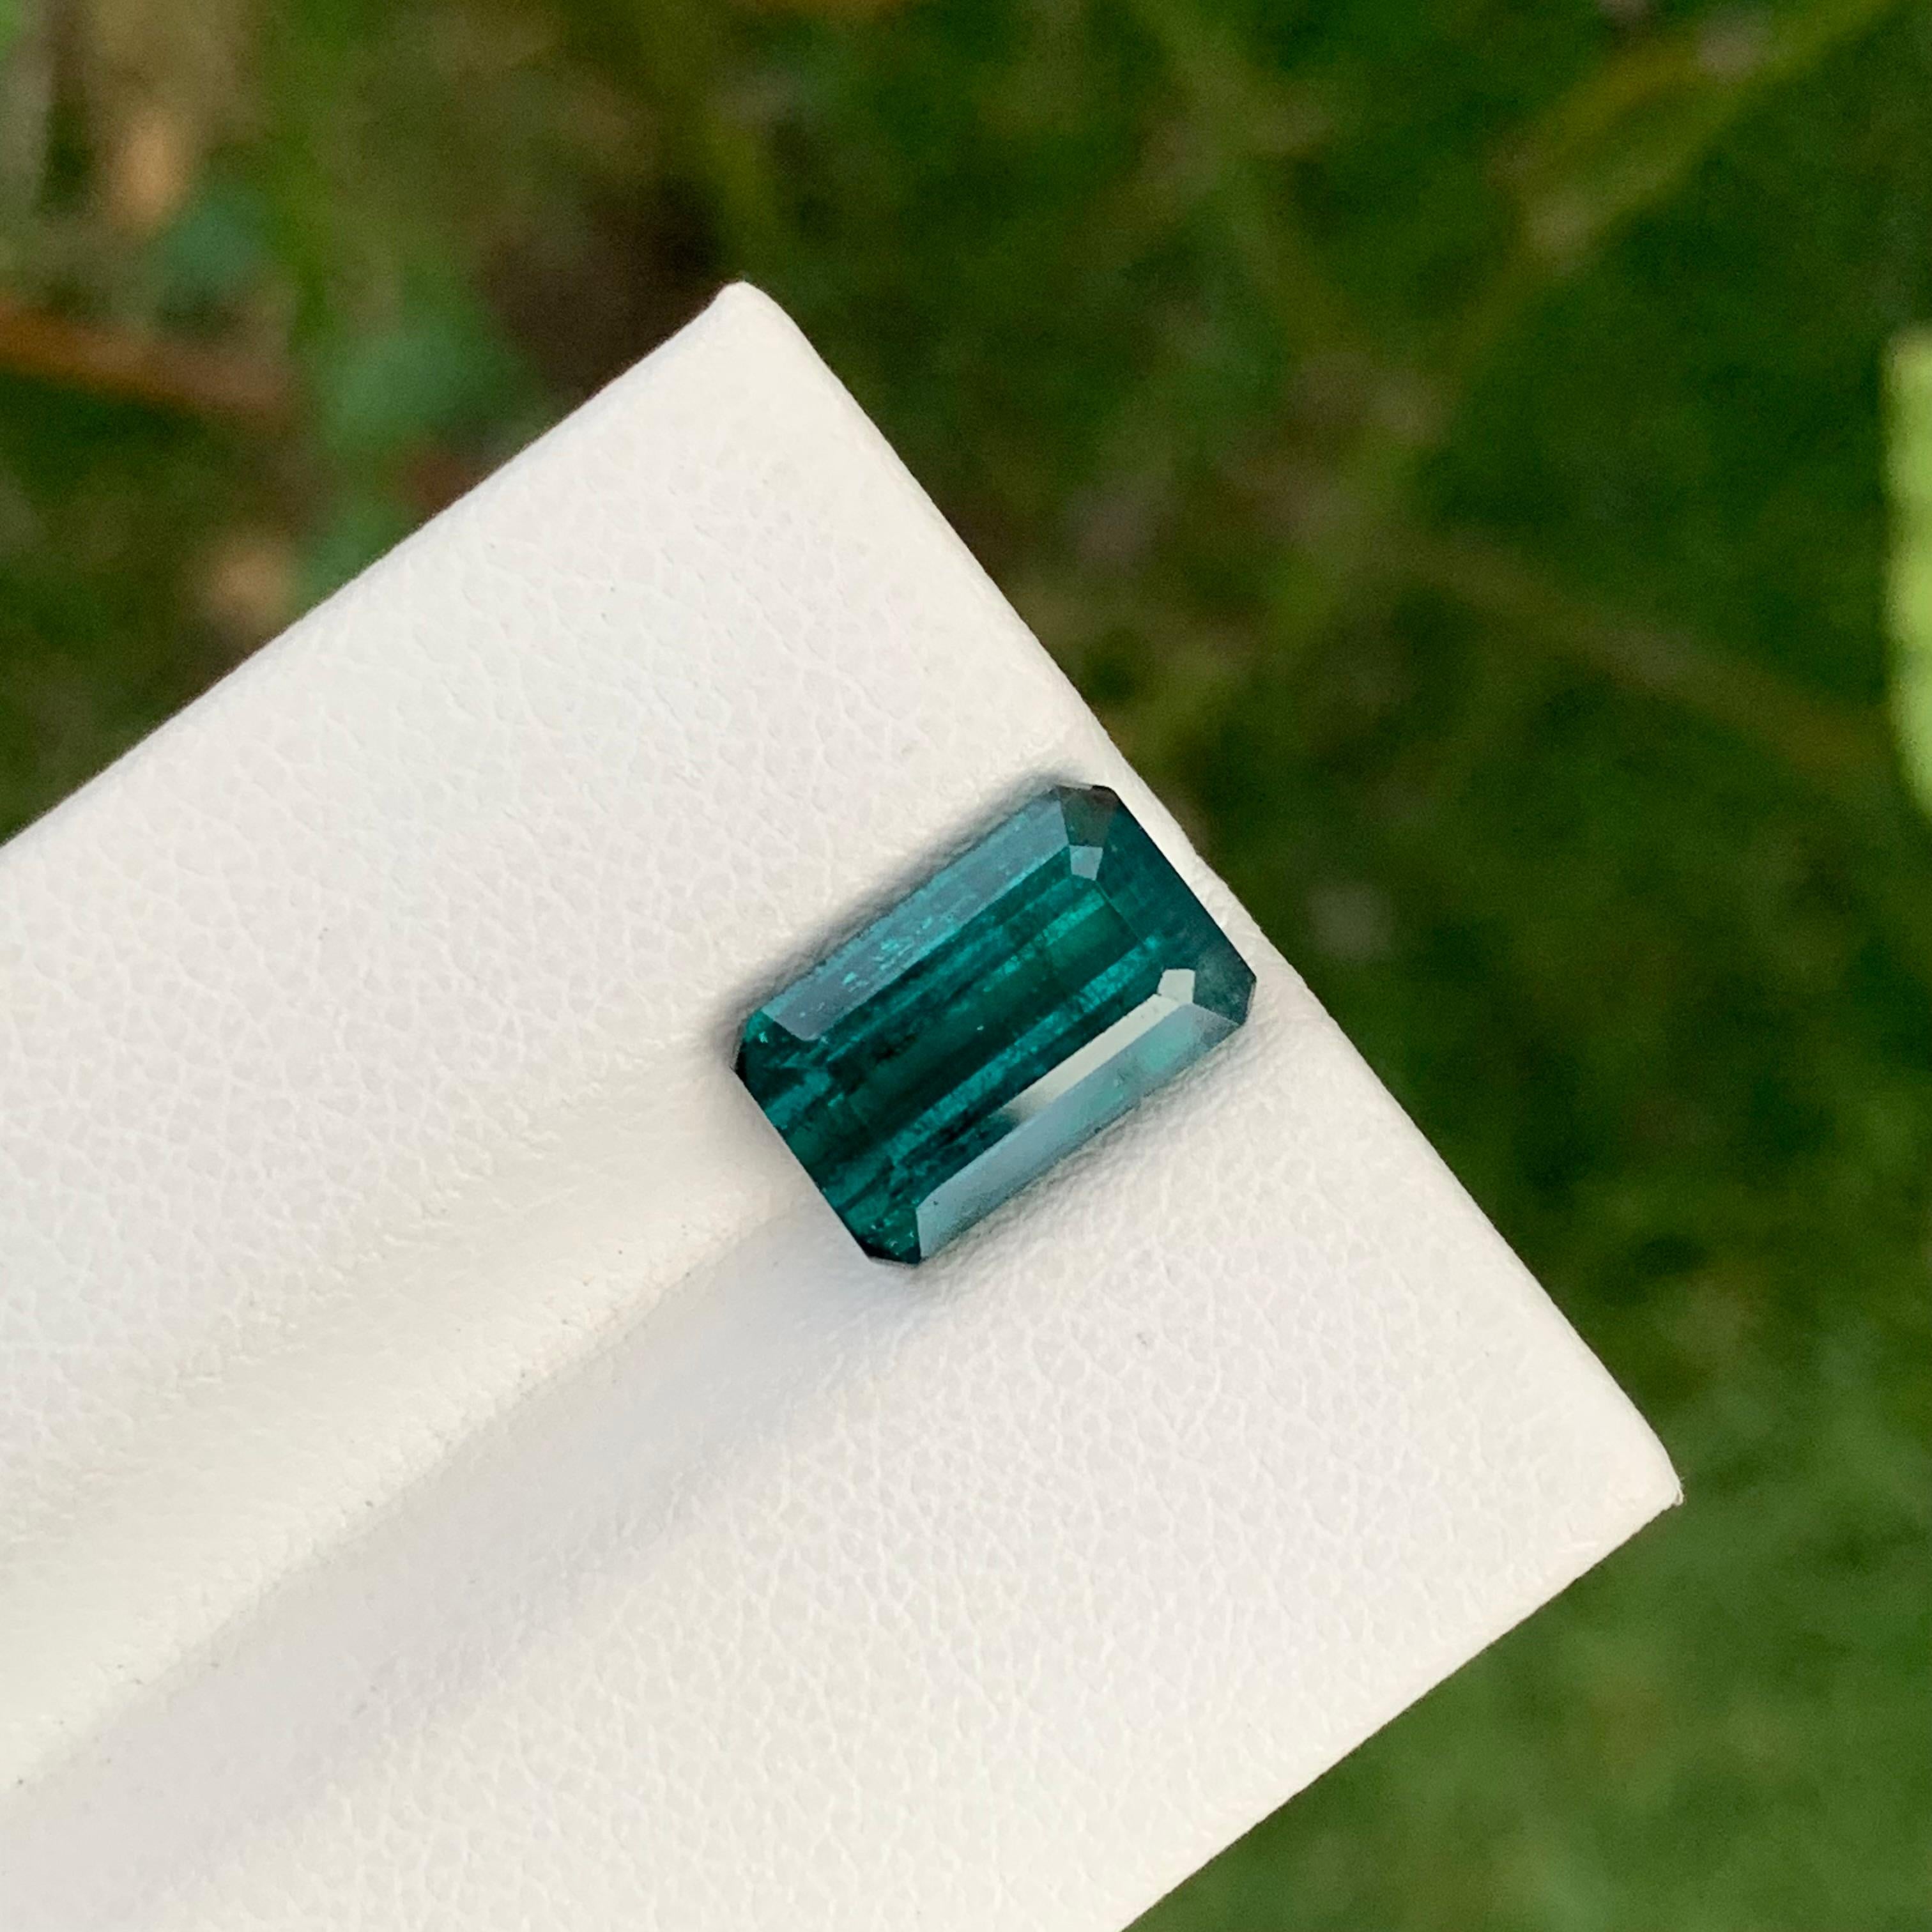 Loose Indicolite Tourmaline
Weight: 3.80 Carats
Dimension: 10.6 x 6.8 x 5.3 Mm
Colour: Blue
Origin: Afghanistan
Treatment: Non
Certificate: On Demand

Indicolite tourmaline, prized for its stunning blue hues ranging from serene sky blues to deep